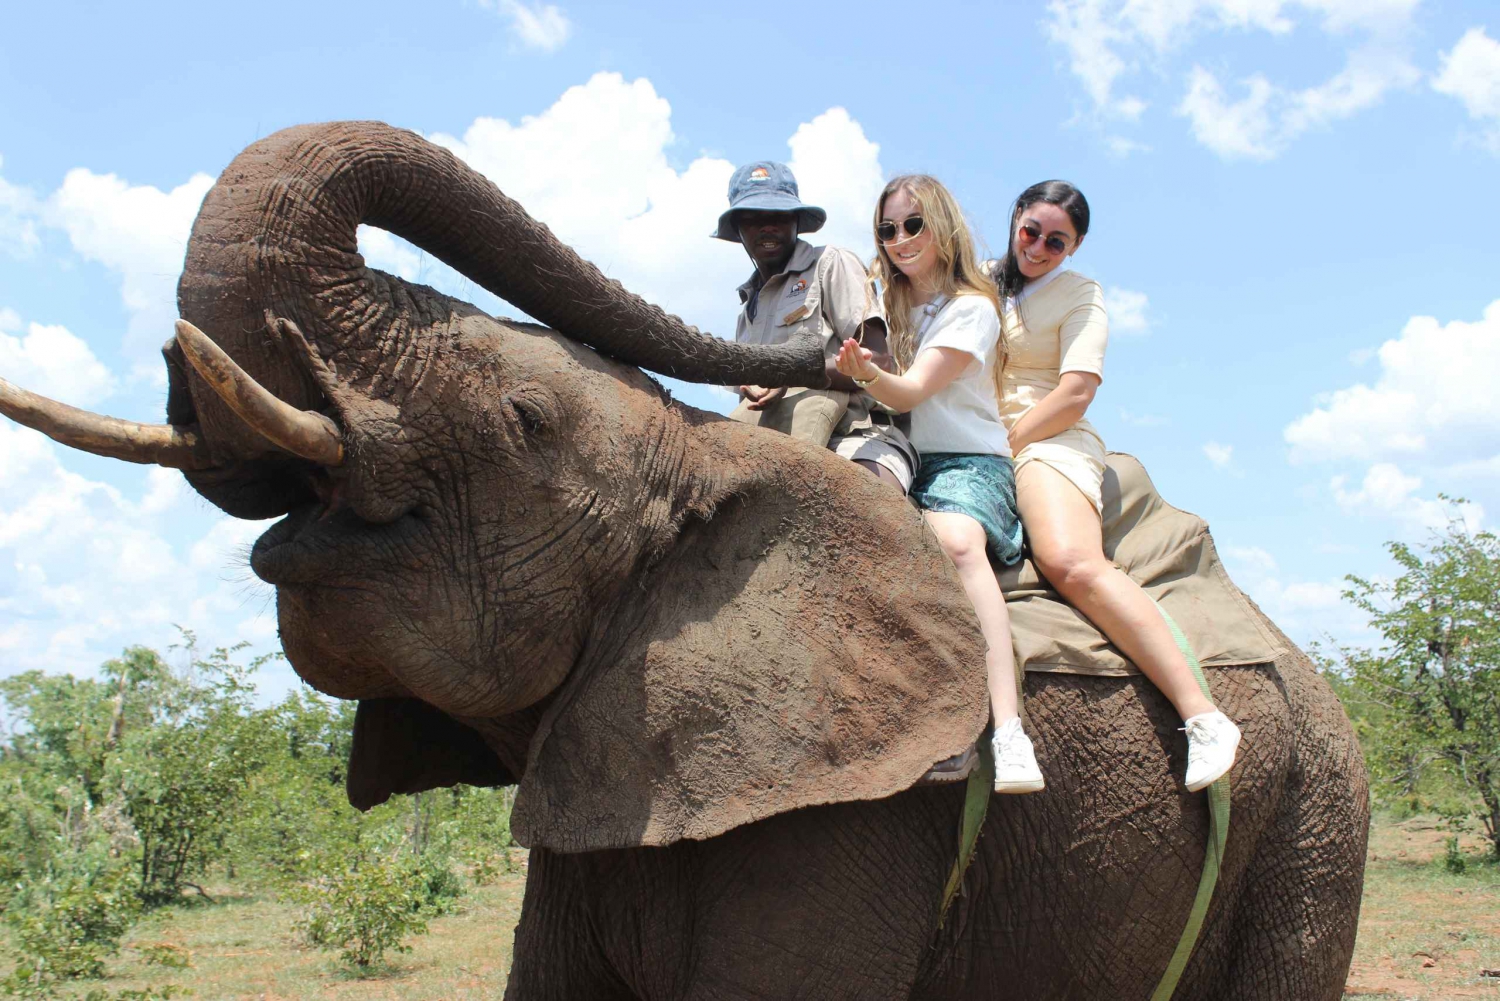 Interact, walk side by side with elephants in Victoria Falls